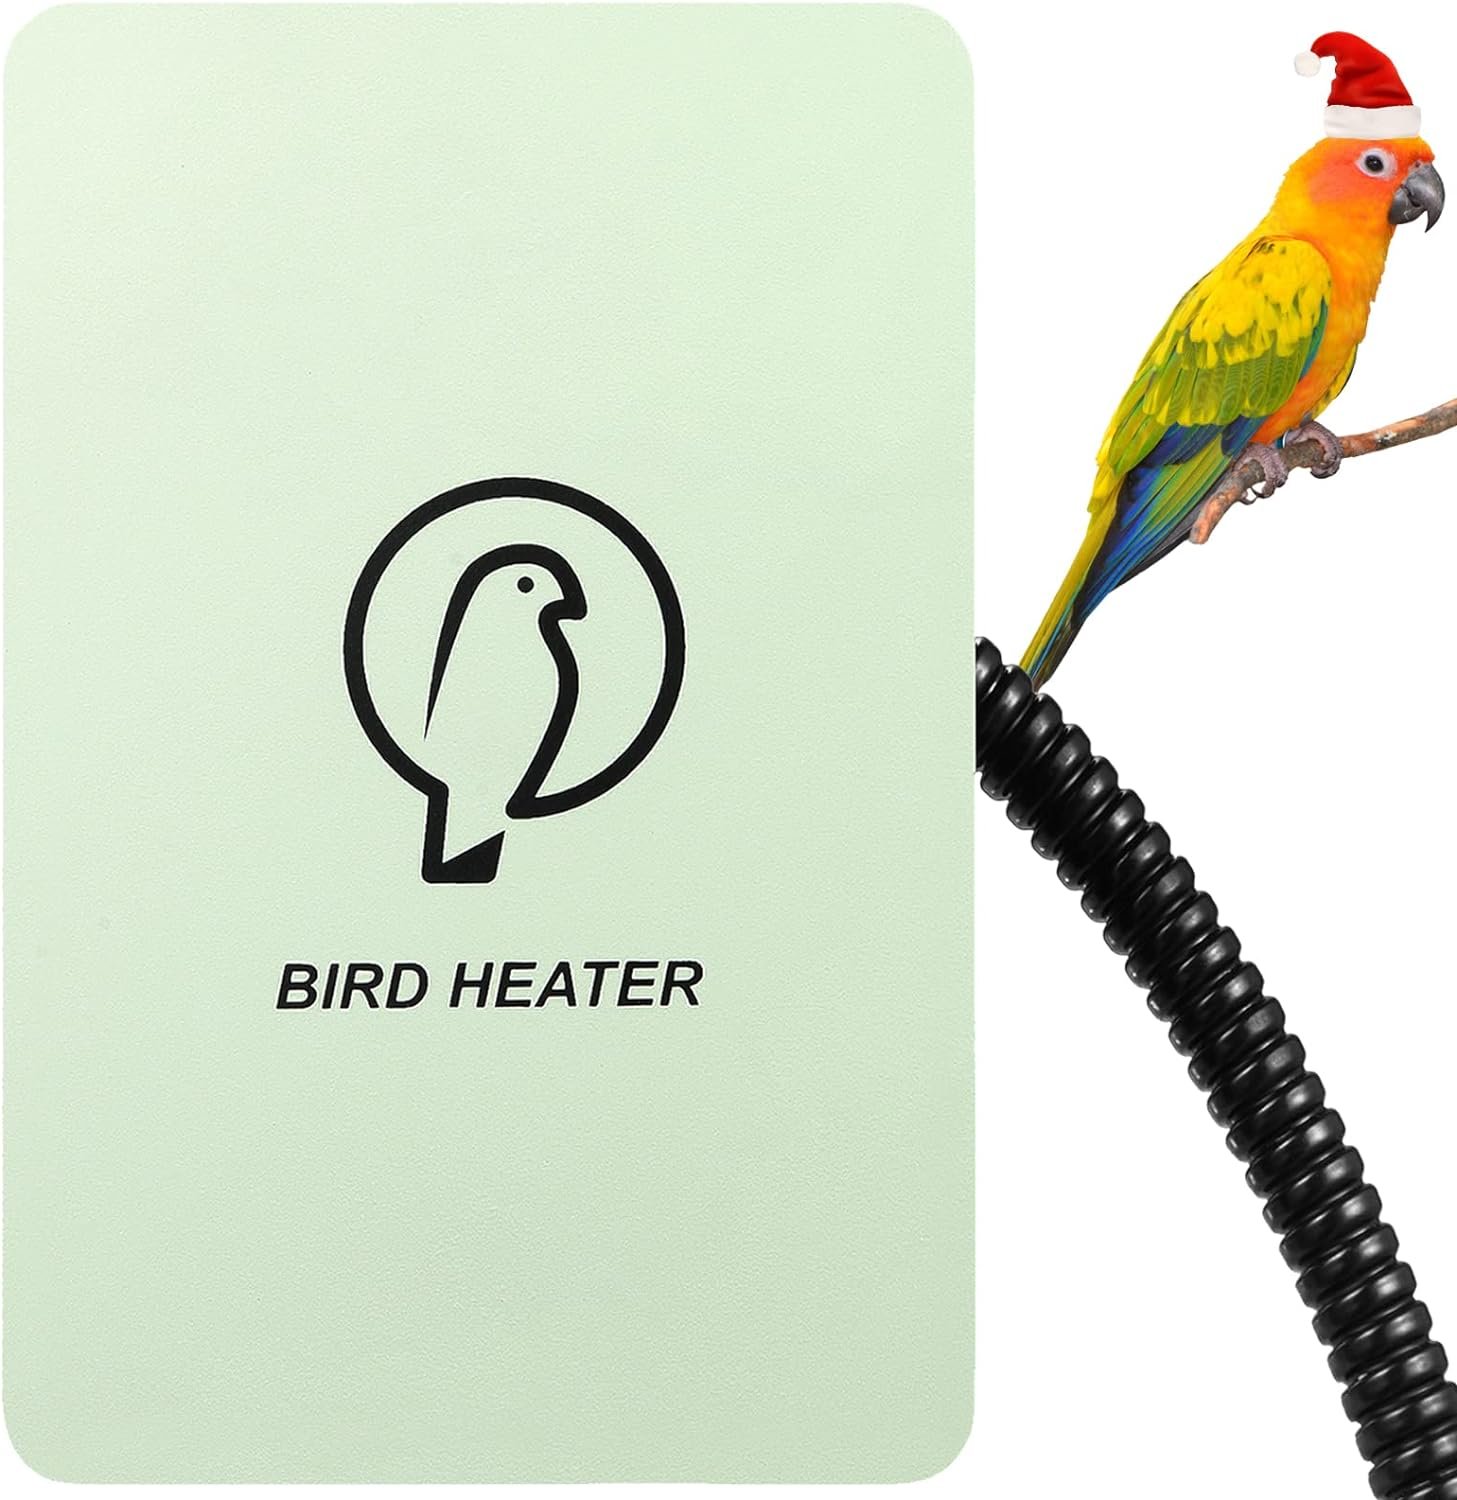 Kokopro Bird Heater for Cage - Snuggle Up Bird Warmer for Exotic Pet Birds, 10W African Grey, Parakeets, Parrots, (3.7x5.7)